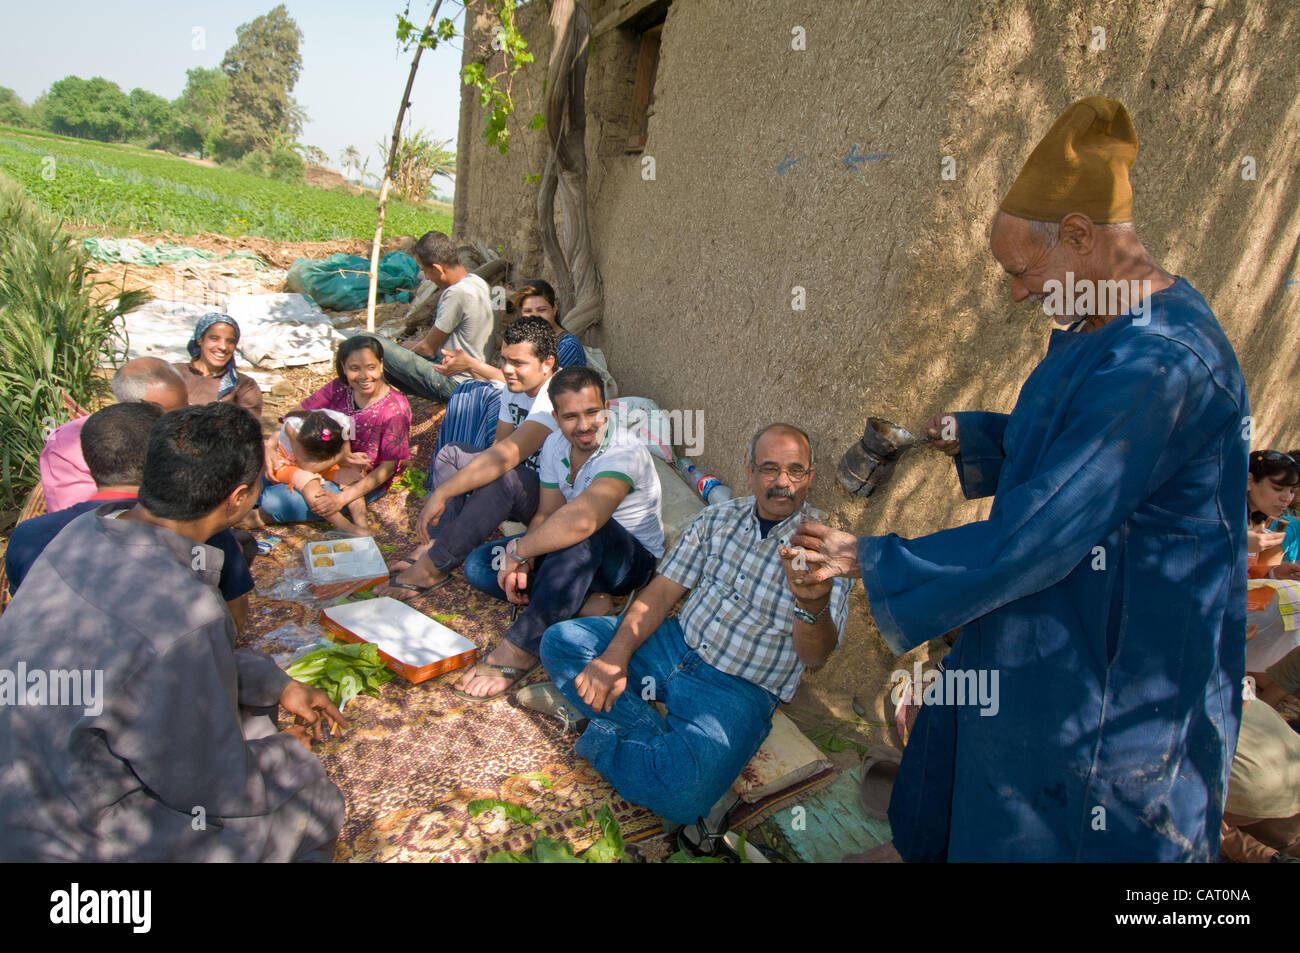 Egyptians from all walks of life celebrate the hugely popular holiday of the official first day of spring 'Sham El Nessim'-People flocked to picnic in parks and in the countryside Stock Photo